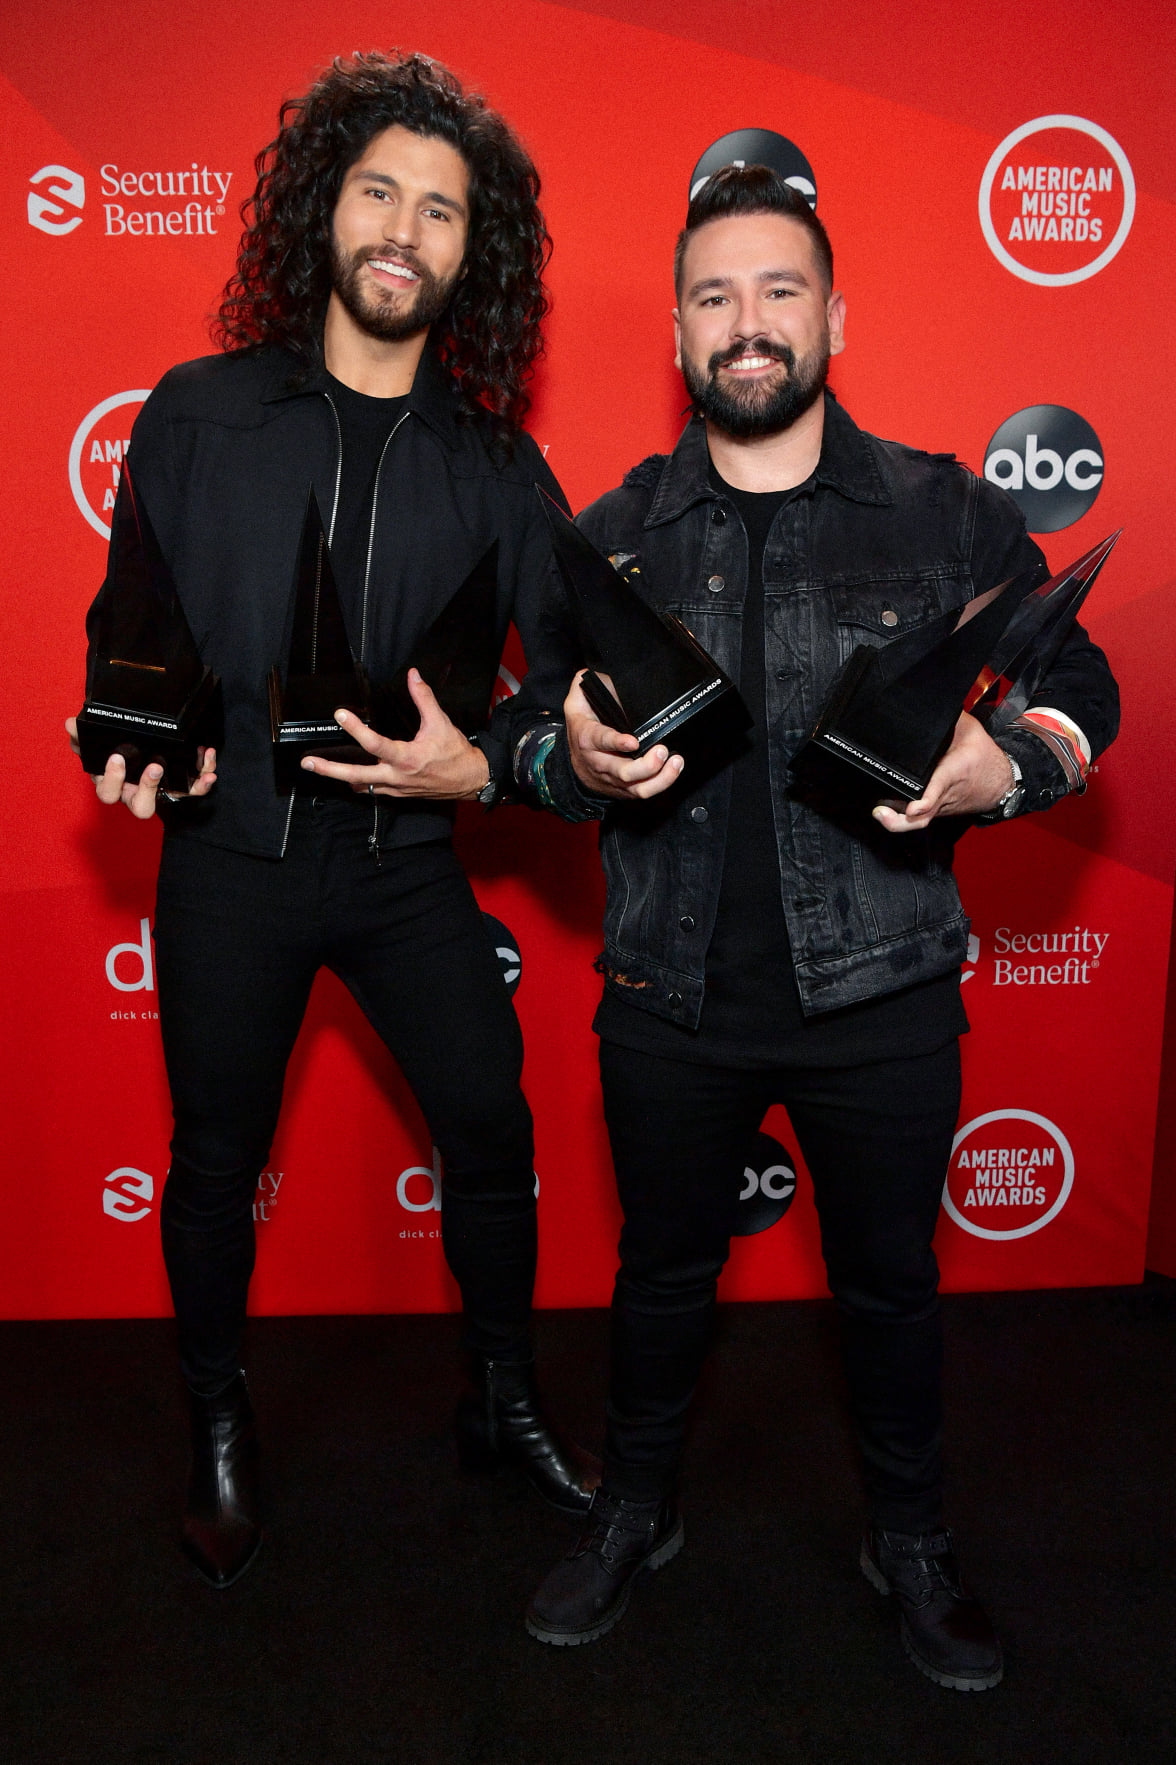 DAN + SHAY WIN THREE OUT OF THREE AMERICAN MUSIC AWARDS, TIED FOR MOST-AWARDED AT TONIGHT'S CEREMONY